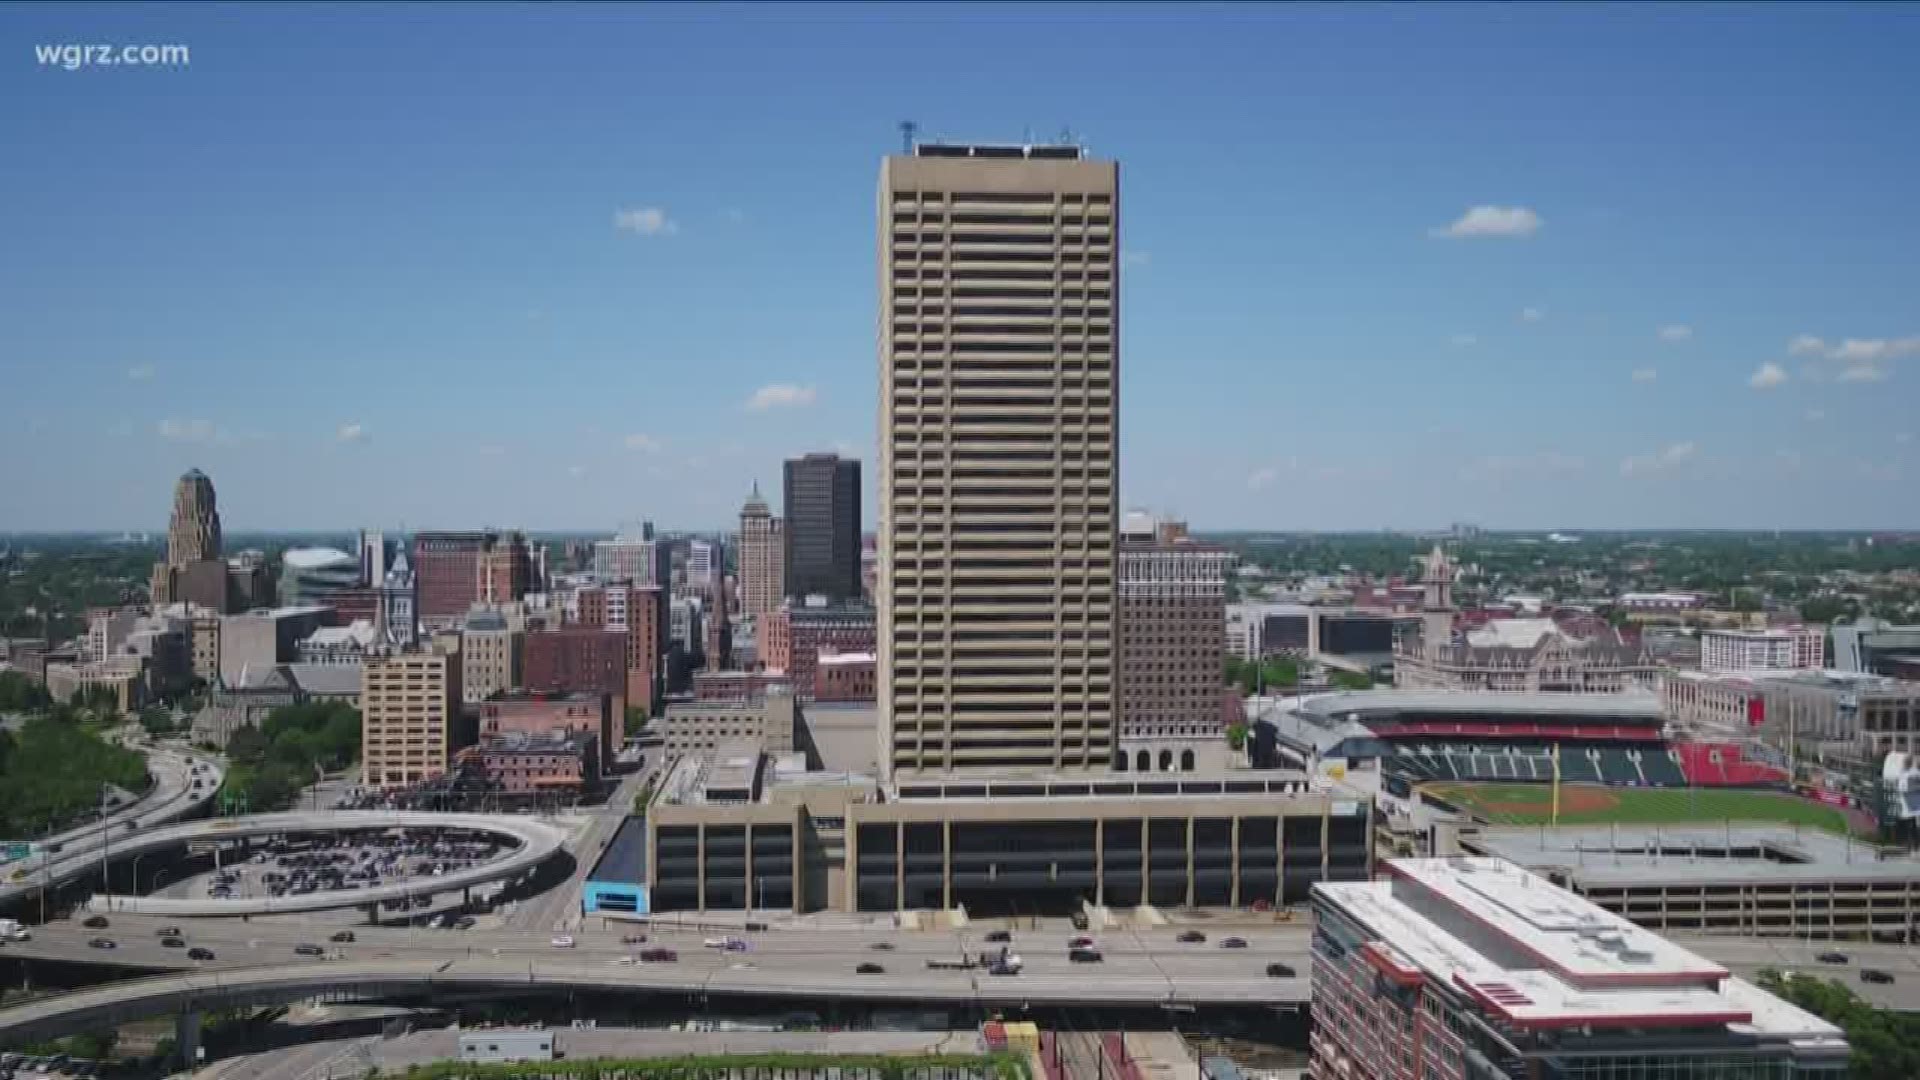 Developer Douglas Jemal says interest is growing in Buffalo's tallest building as new tenants have started moving in.